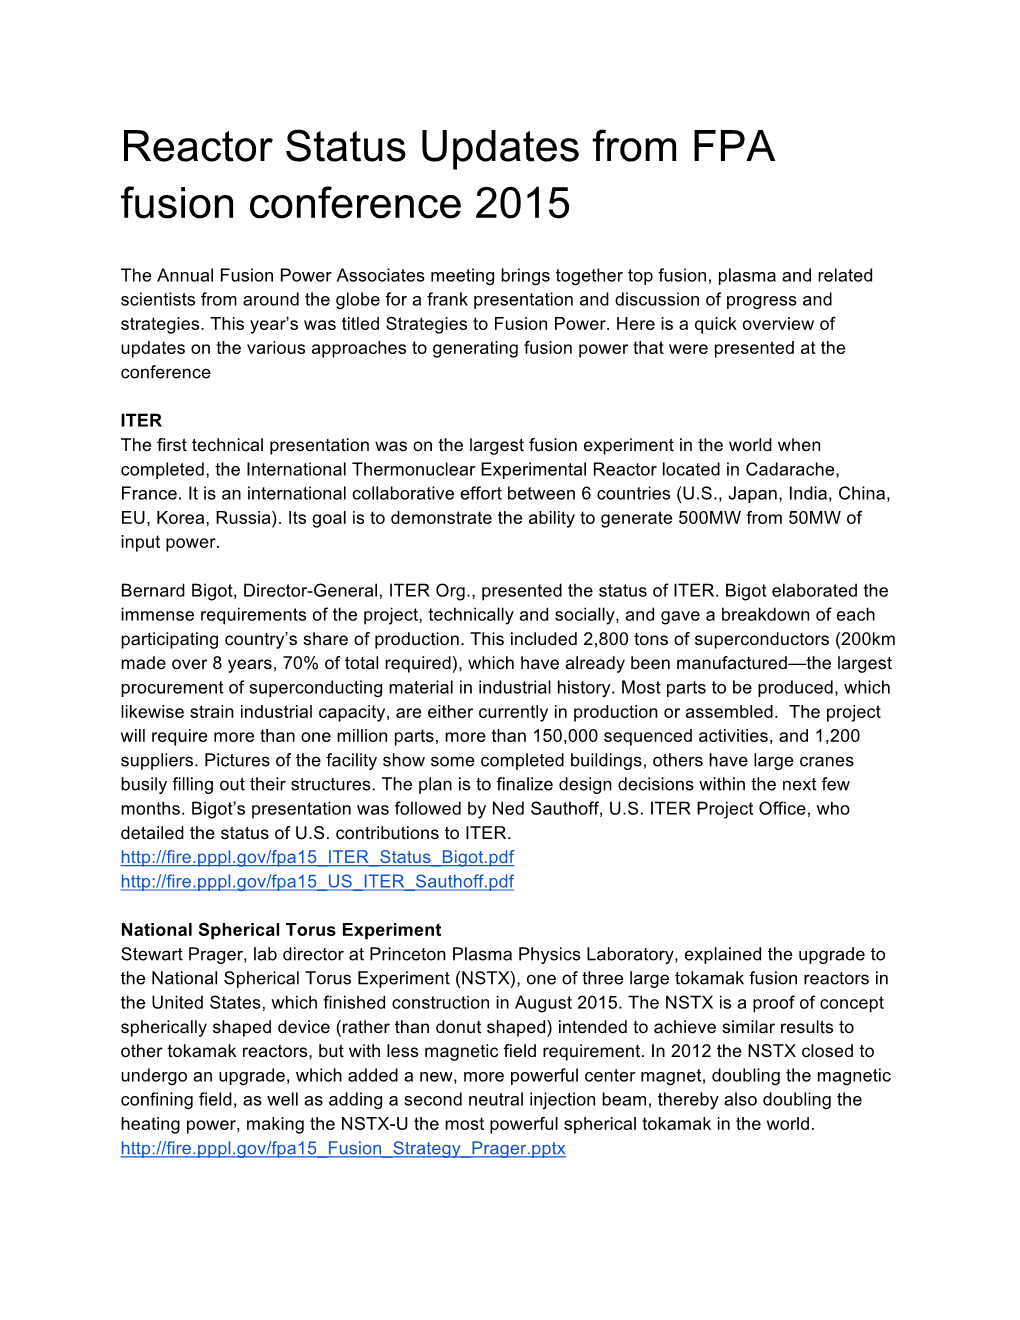 Reactor Status Updates from FPA Fusion Conference 2015